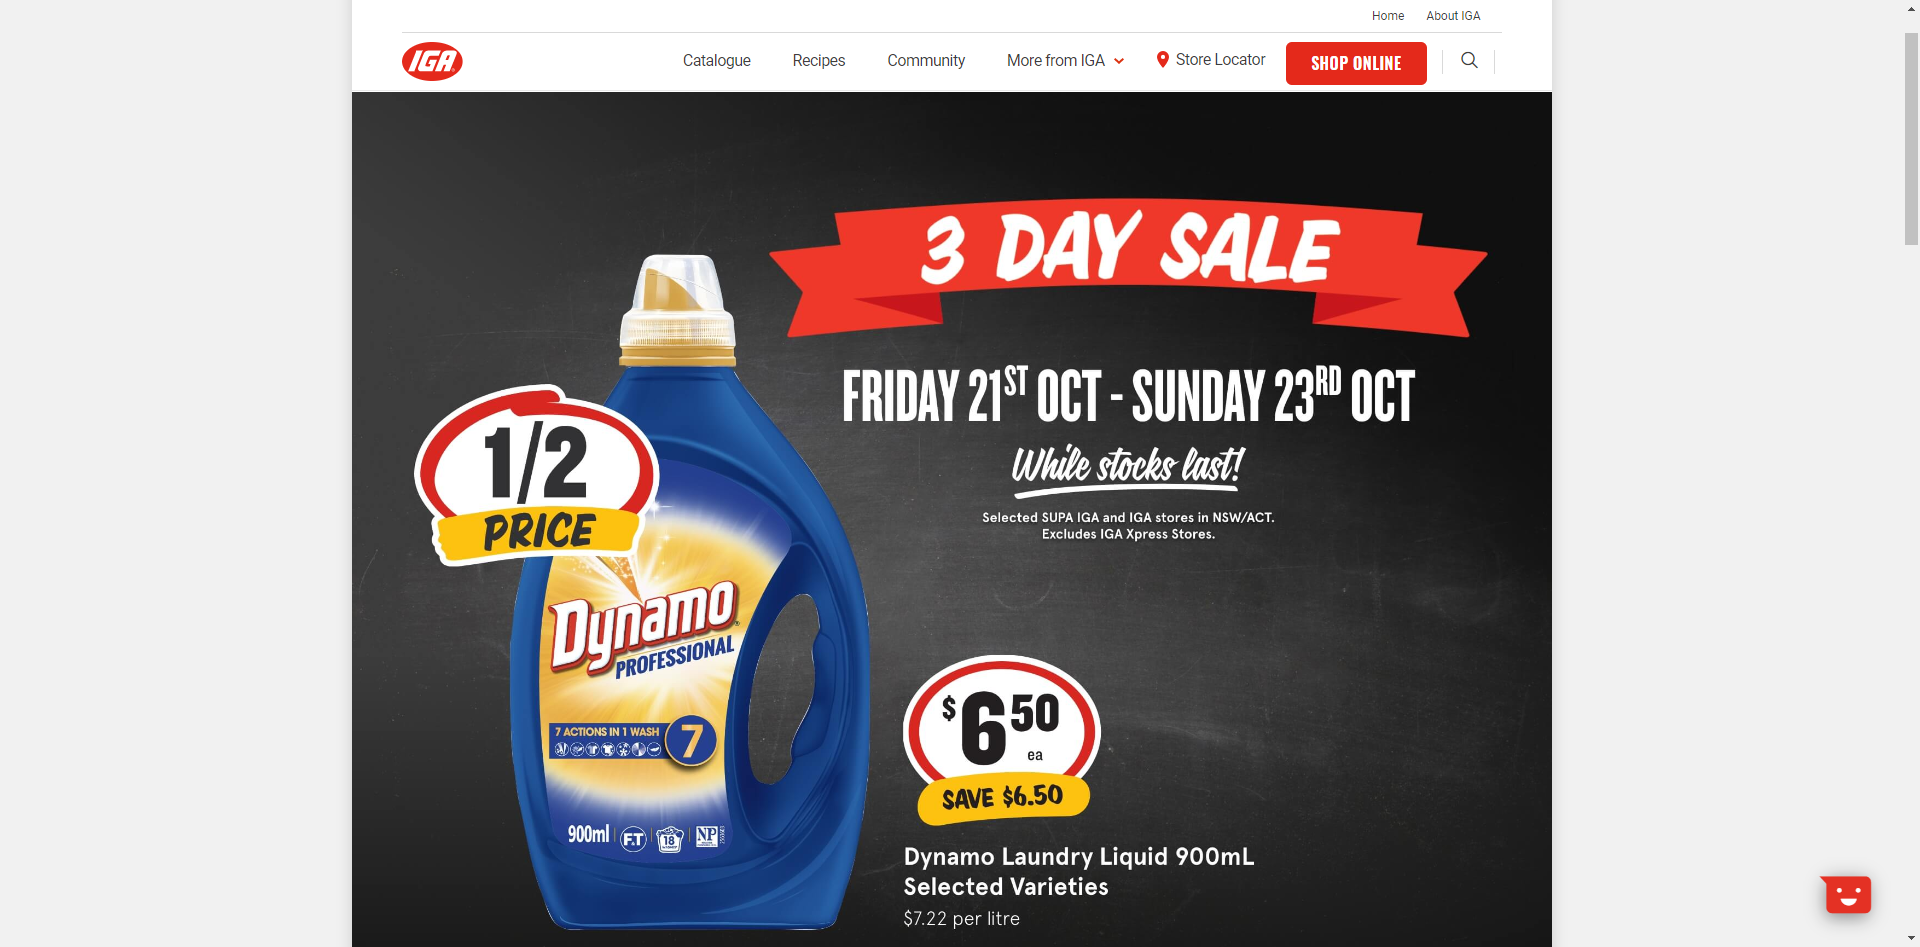 IGA 3 day sale - selected NSW/ACT stores, Dyanamo 900ml $6.50, Whittakers Choc $4, Pepsi 1.25L $1.35